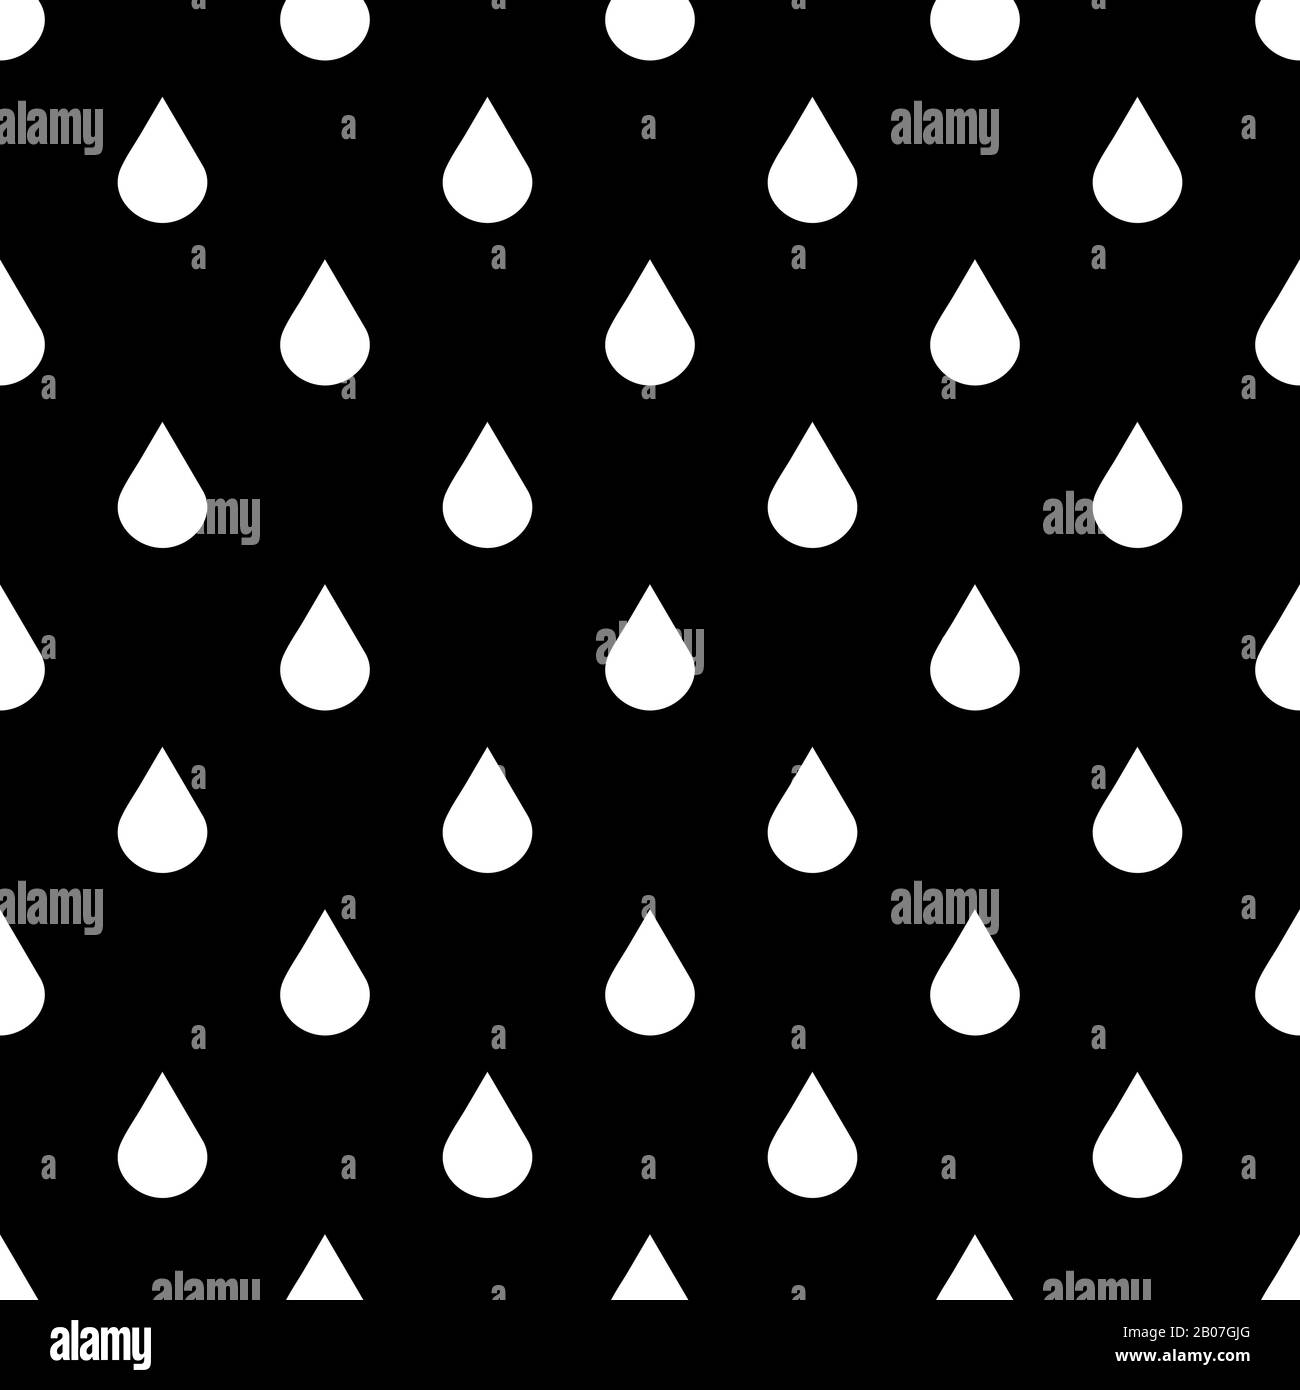 Black and white vector water drops seamless pattern. Illustration of rain art Stock Vector